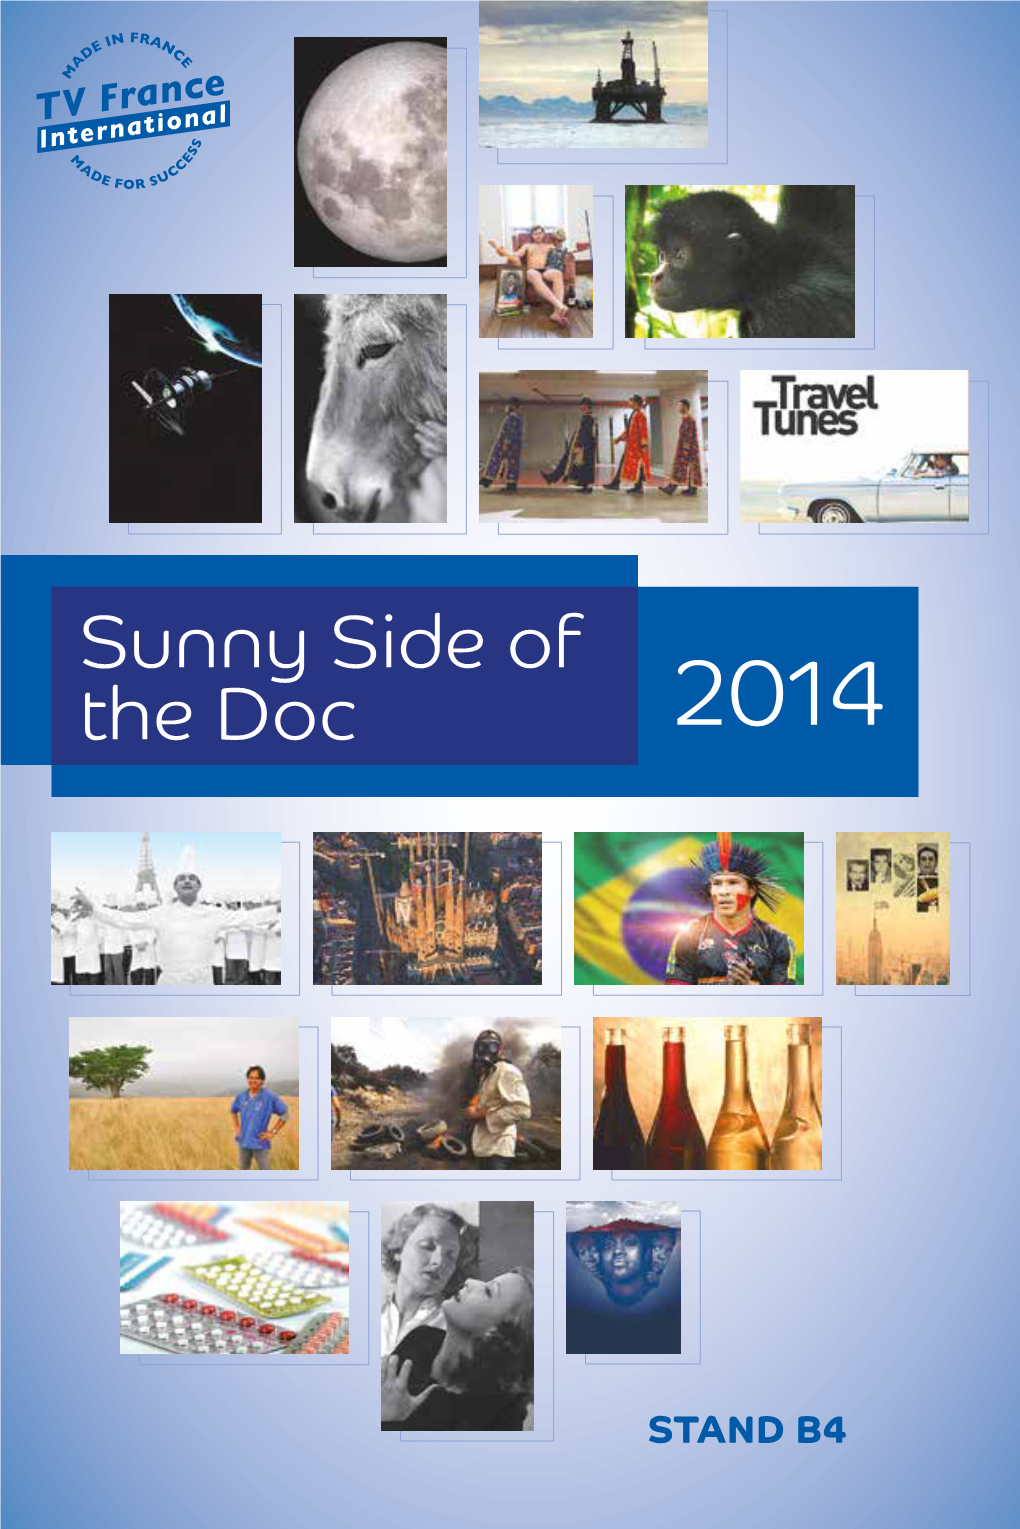 Sunny Side of the Doc 2014